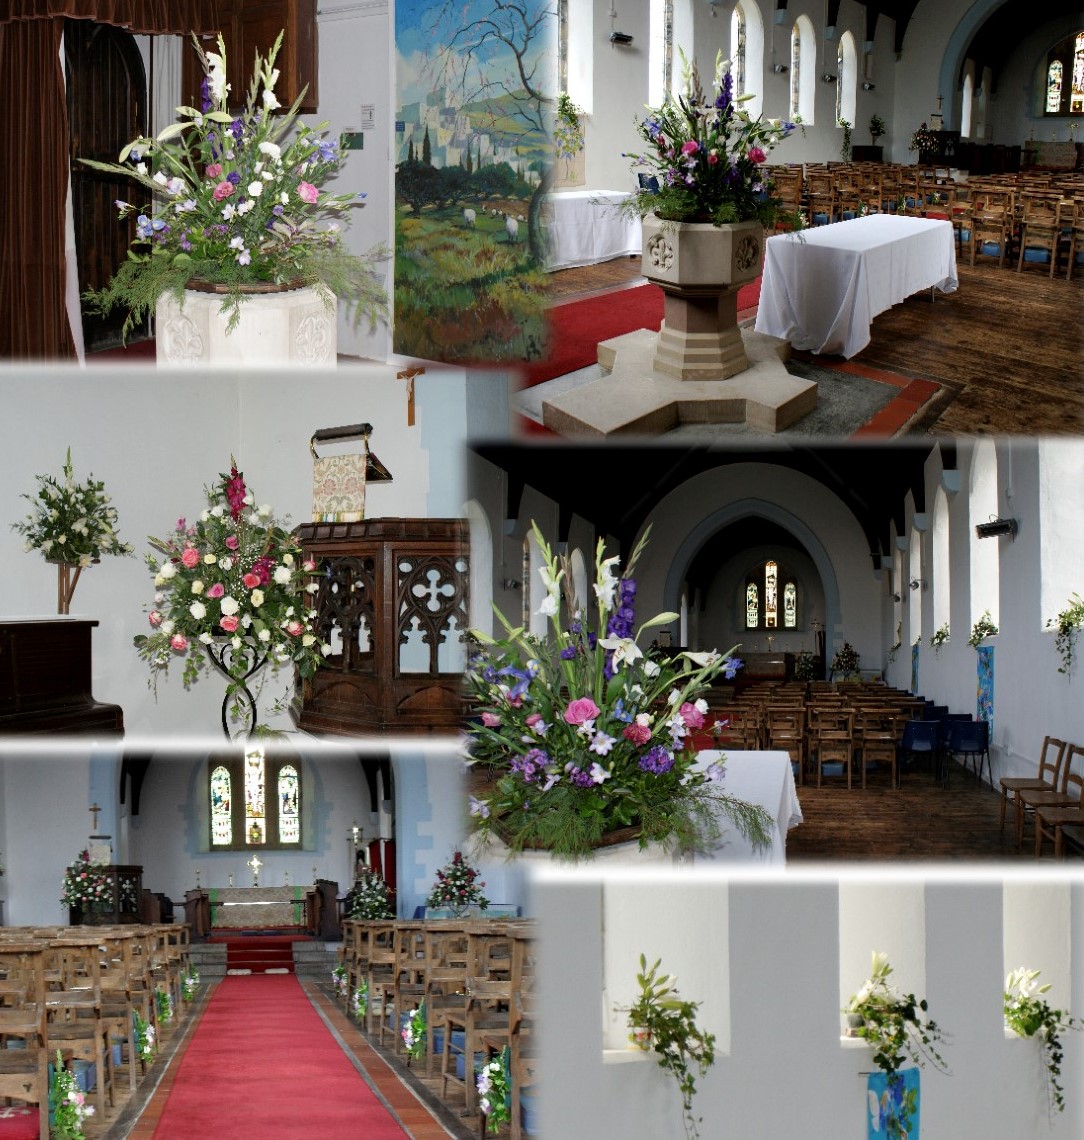 St Peter's Church decorated for a wedding, 2010